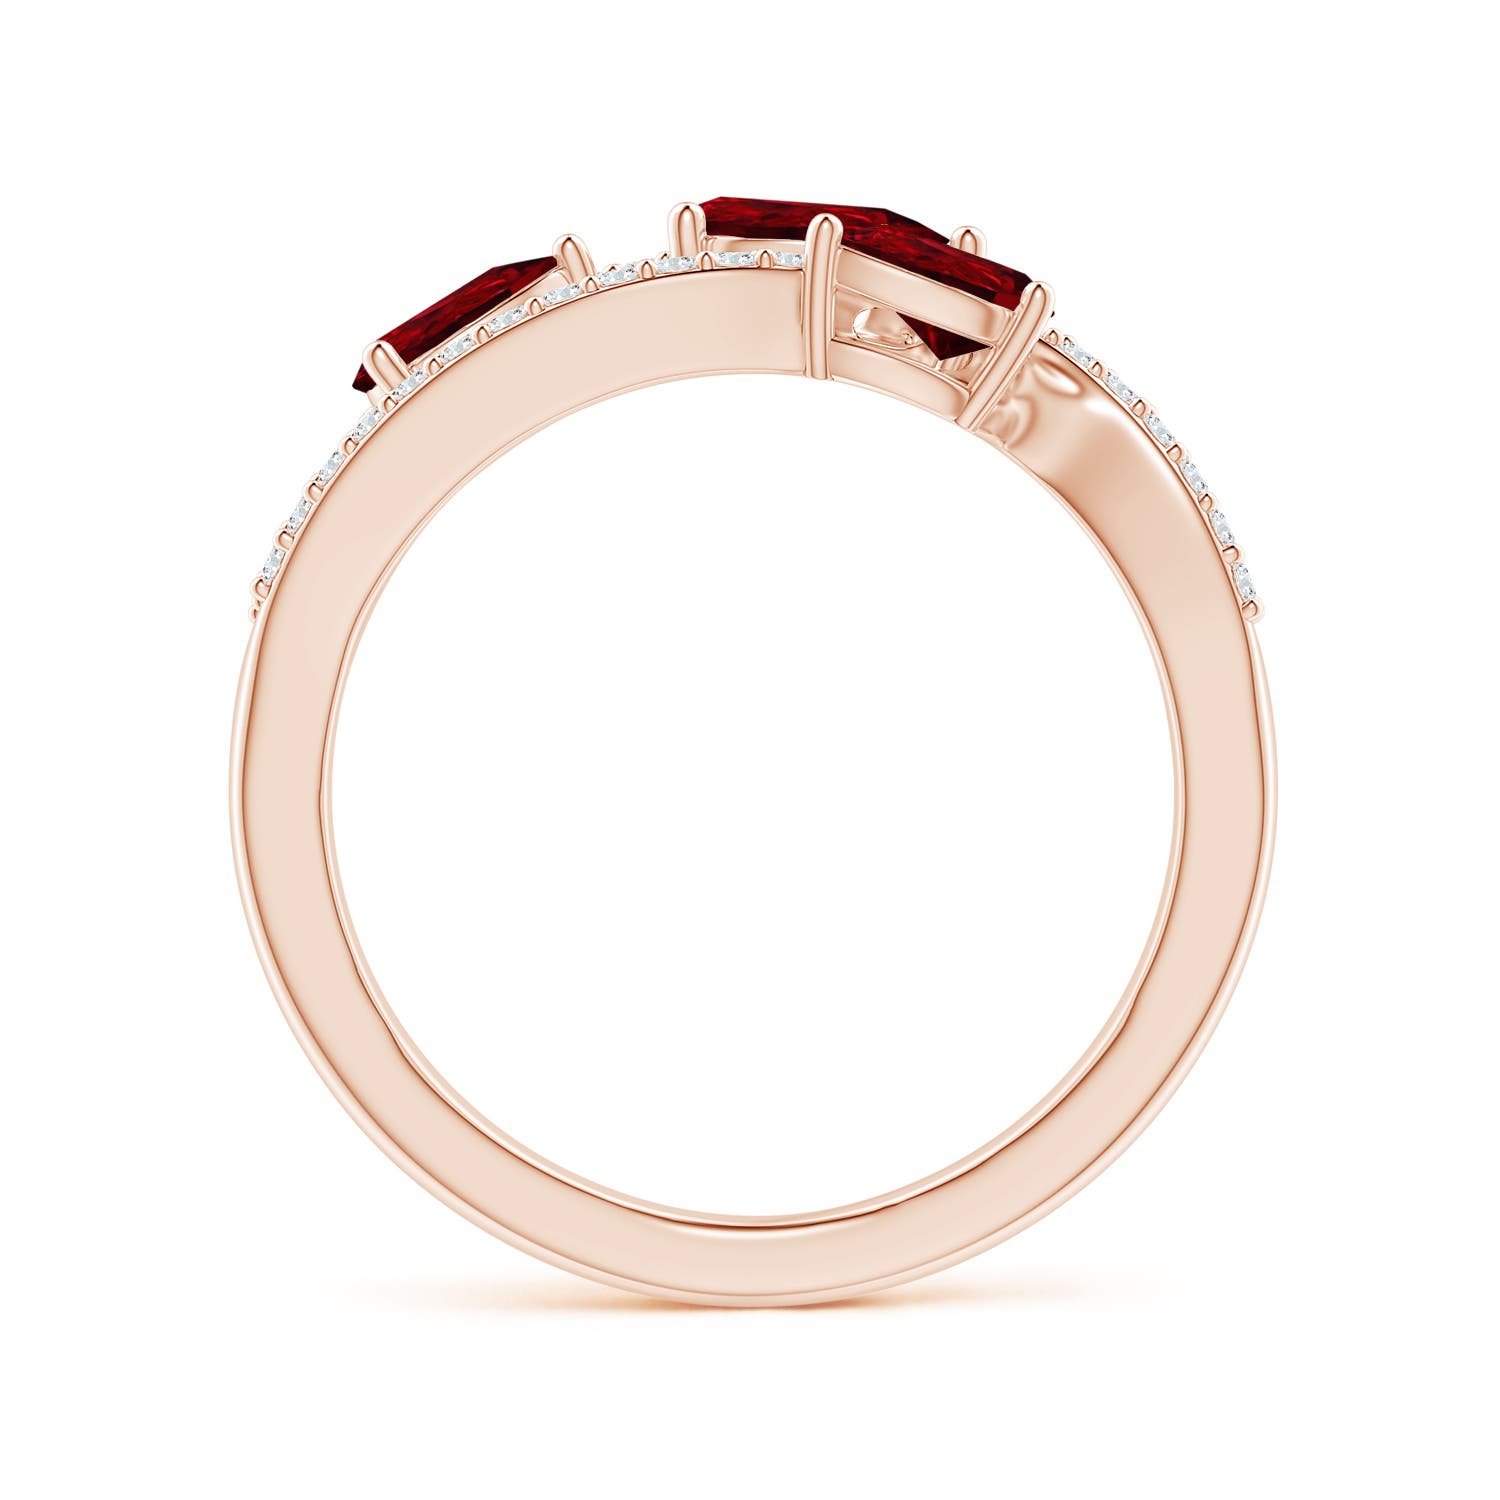 AAAA - Ruby / 1.03 CT / 14 KT Rose Gold